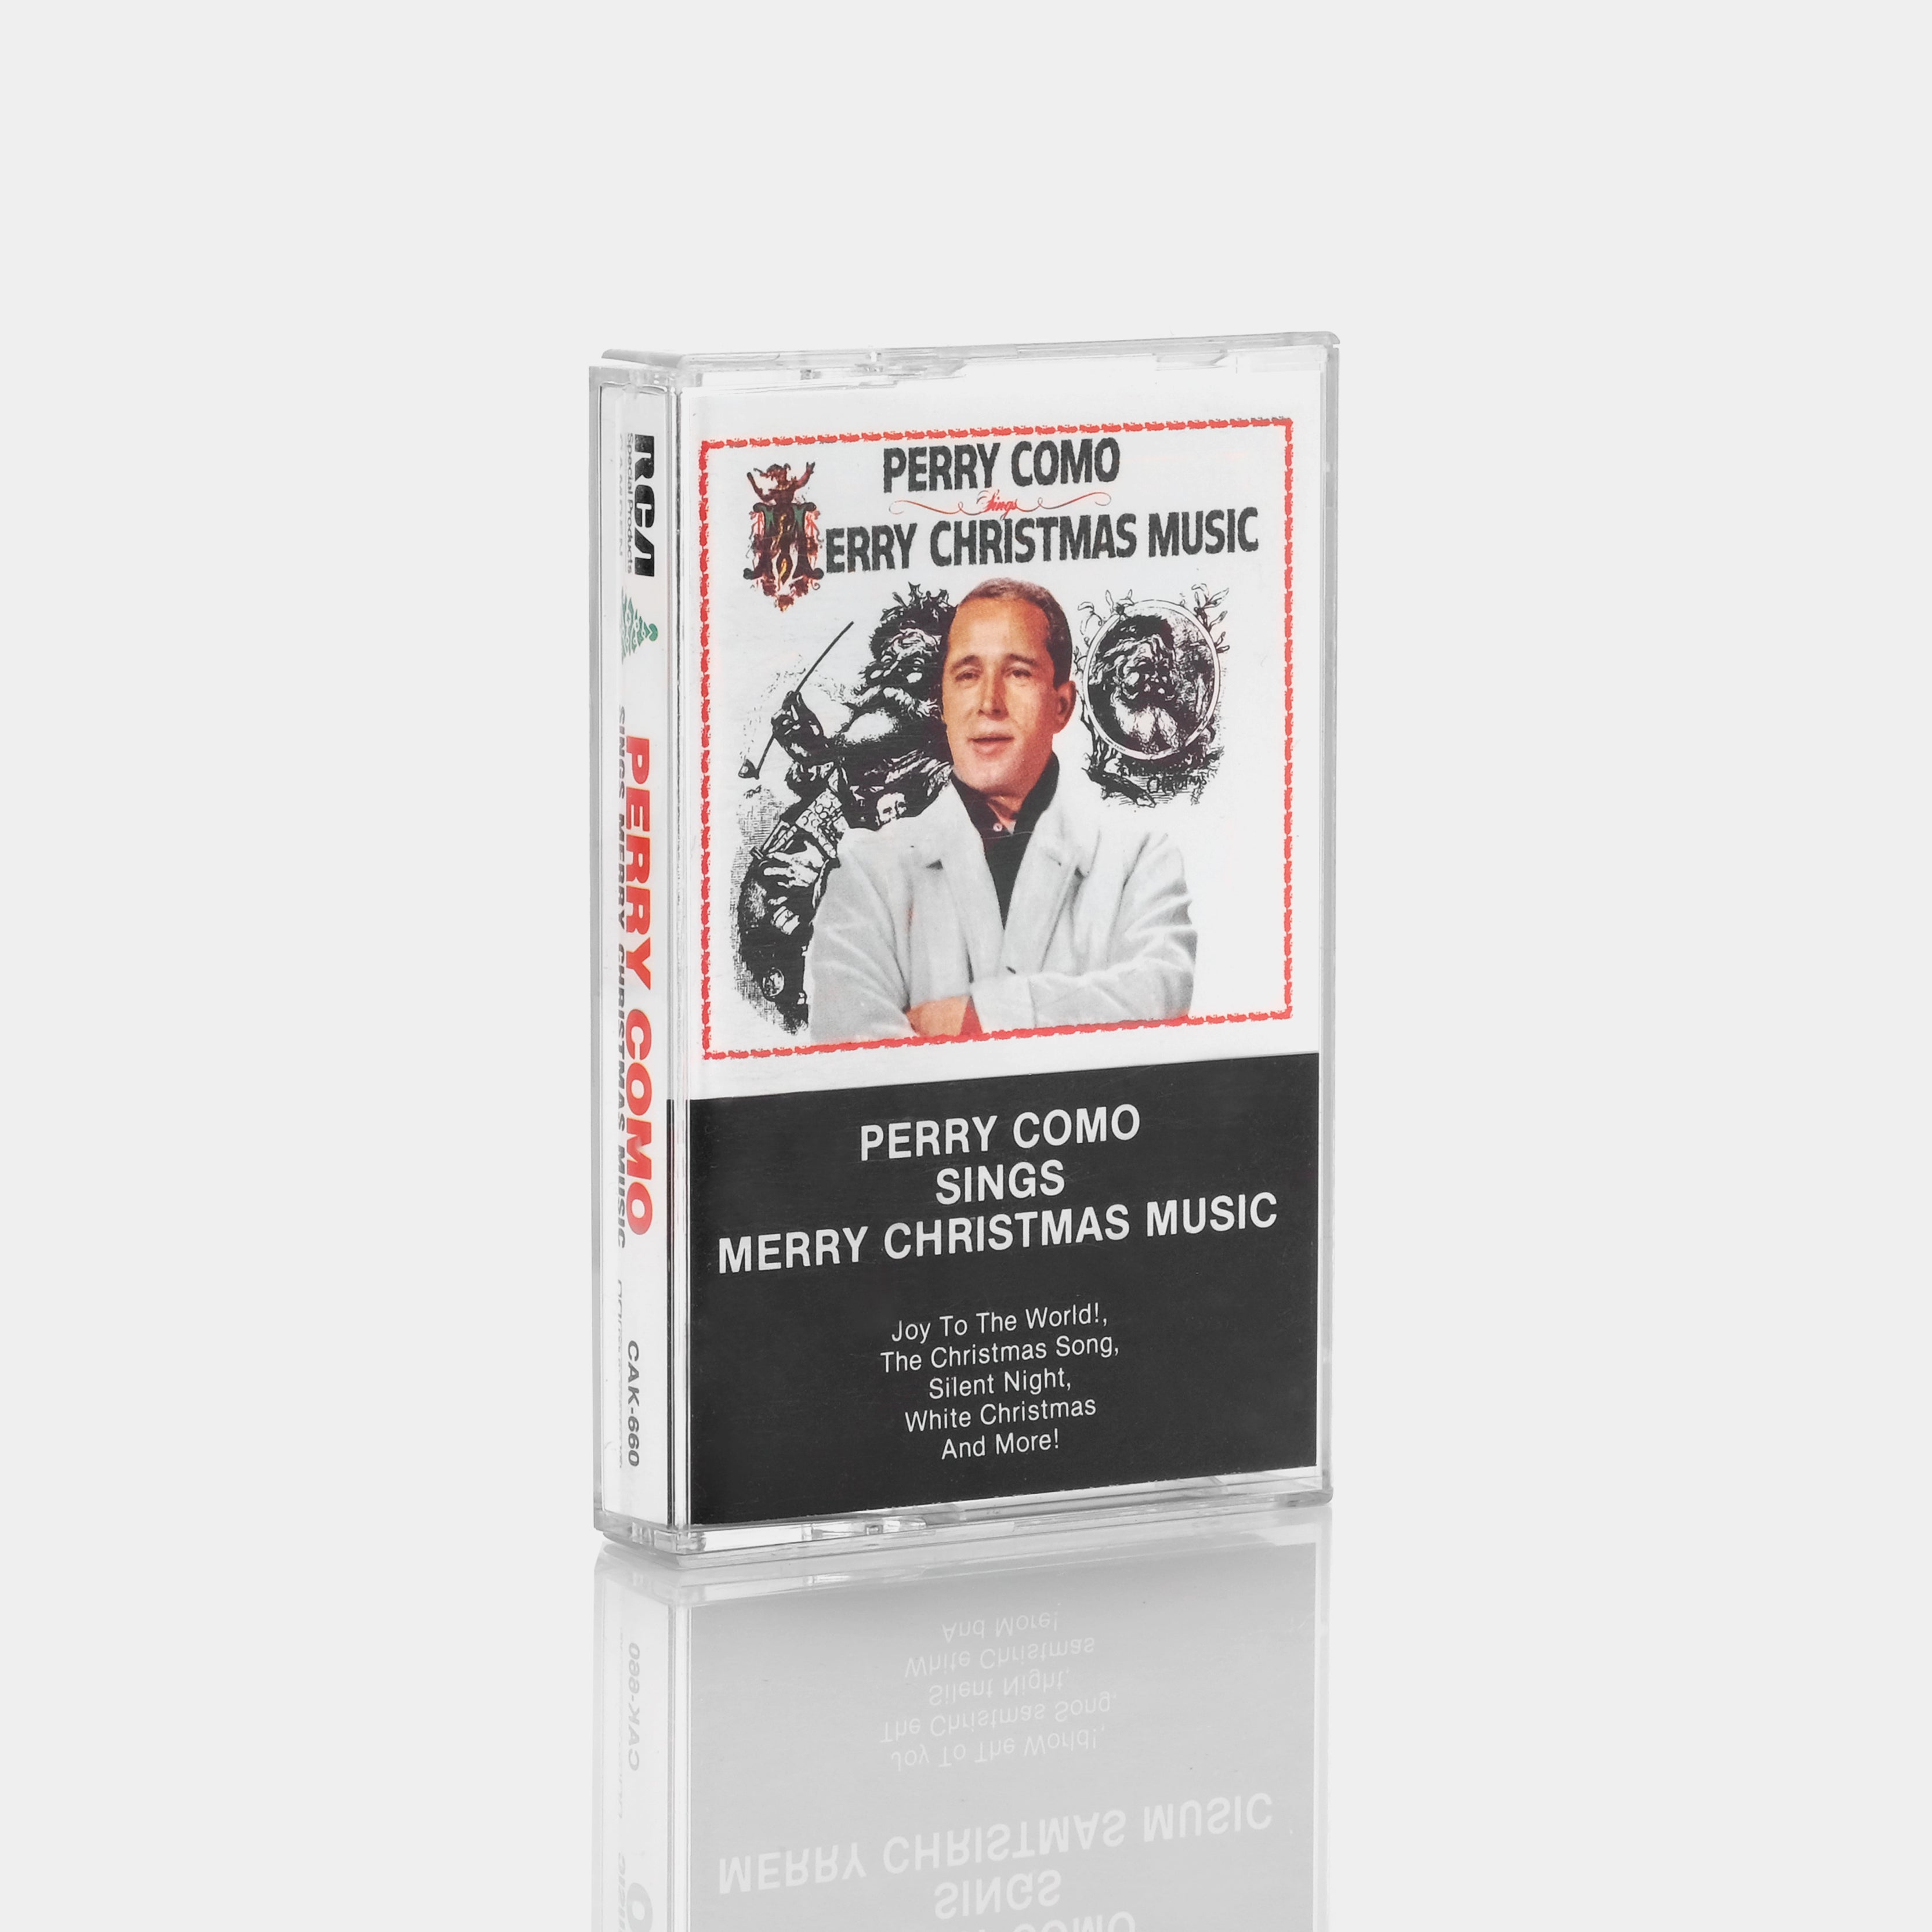 Perry Como Sings Merry Christmas Music Cassette Tape